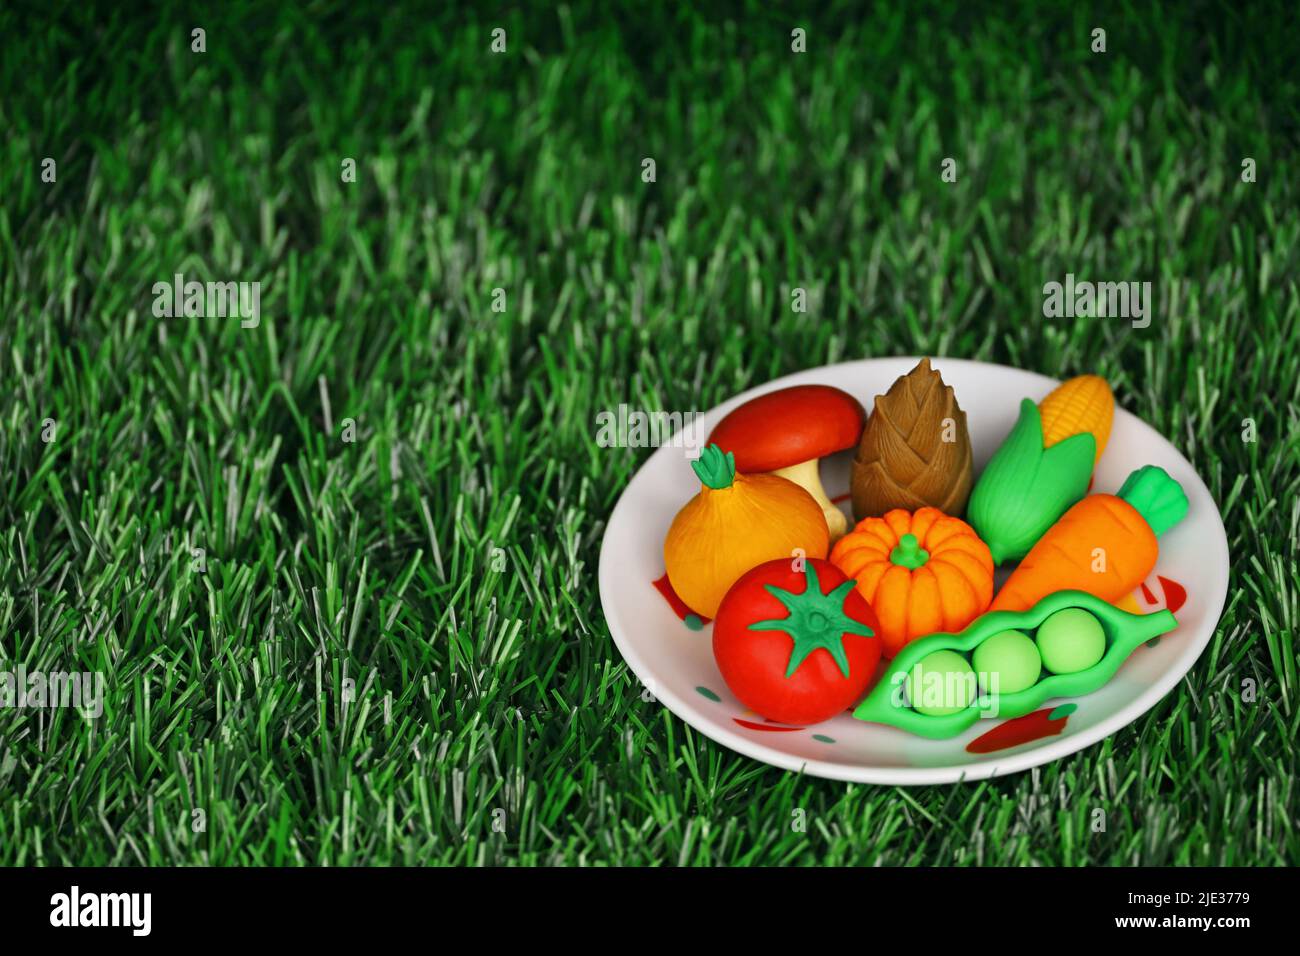 Miniature model of colorful vegetables arrangement on a white plate Stock Photo